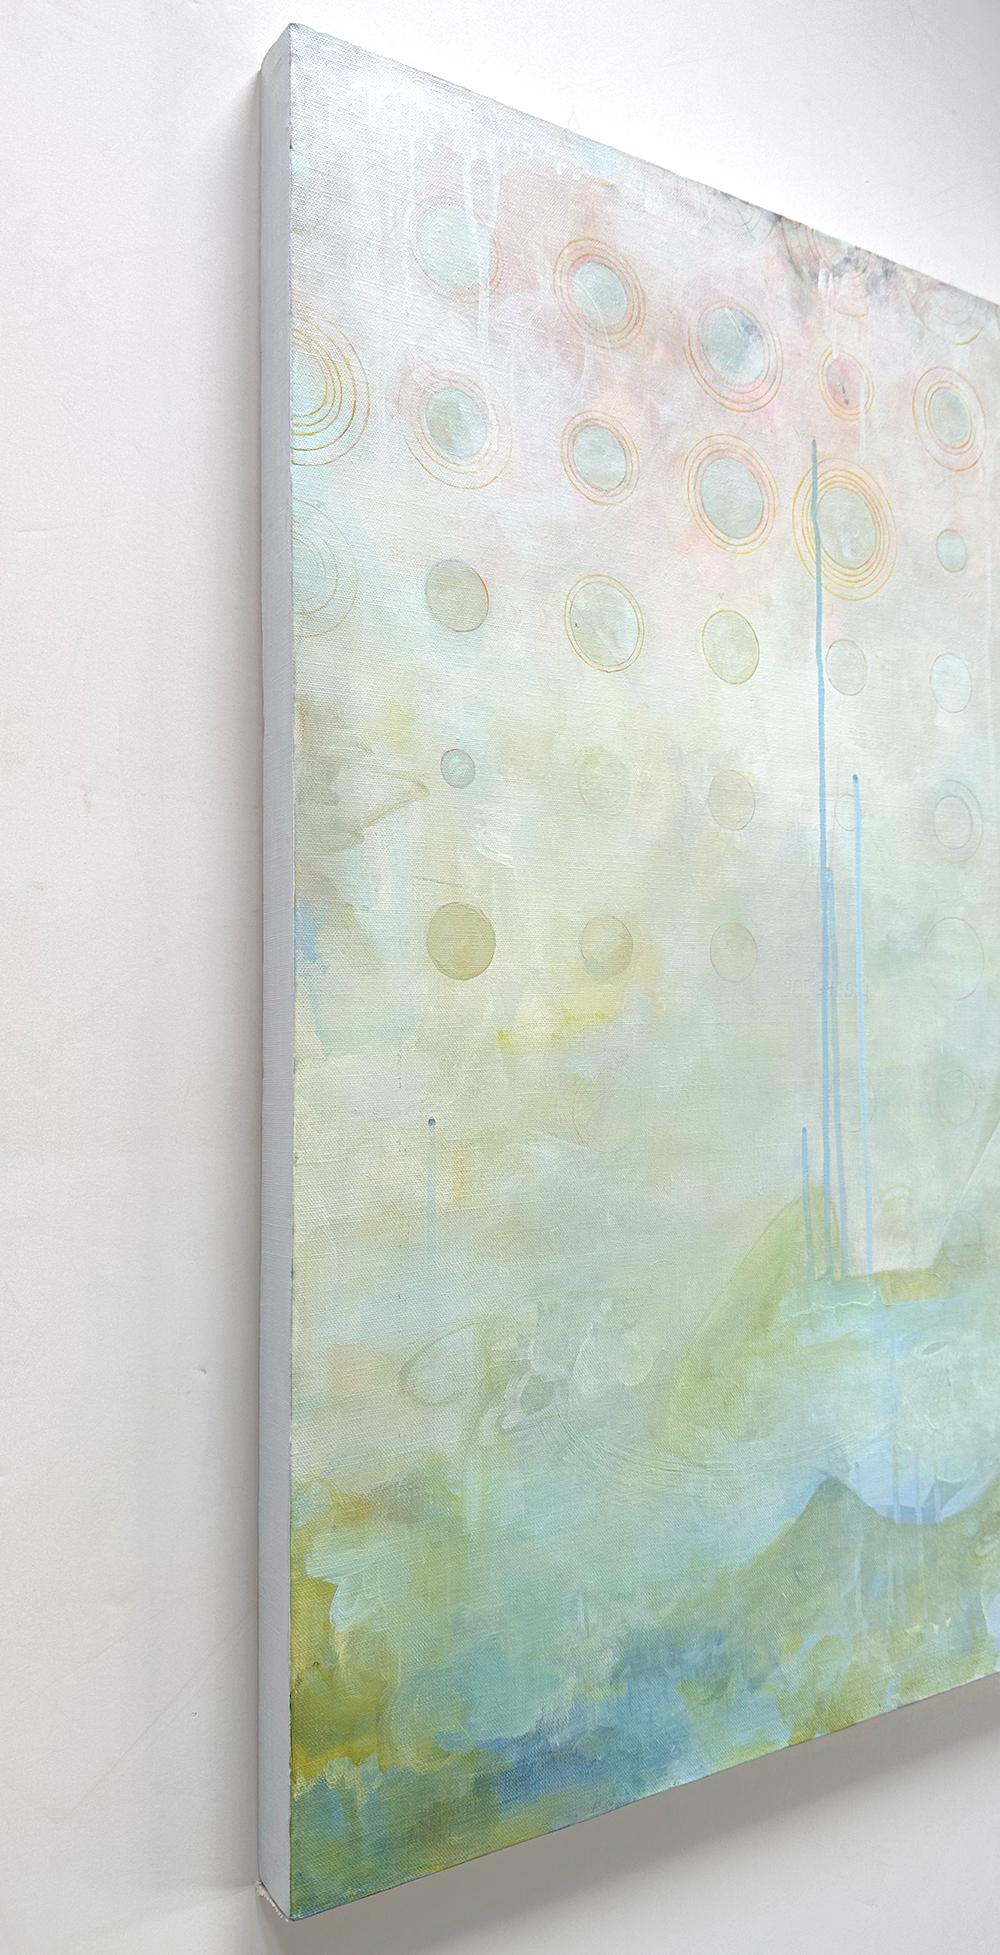 Sandra Cohen’s “Hi-hat Kabbalah” is a 30 x 24 x 1 inch acrylic painting on canvas, painted loosely in a light spring palette of blue, green, pink, and white, with sharp concentric circles fading into the center from the top. Where sky meets water in